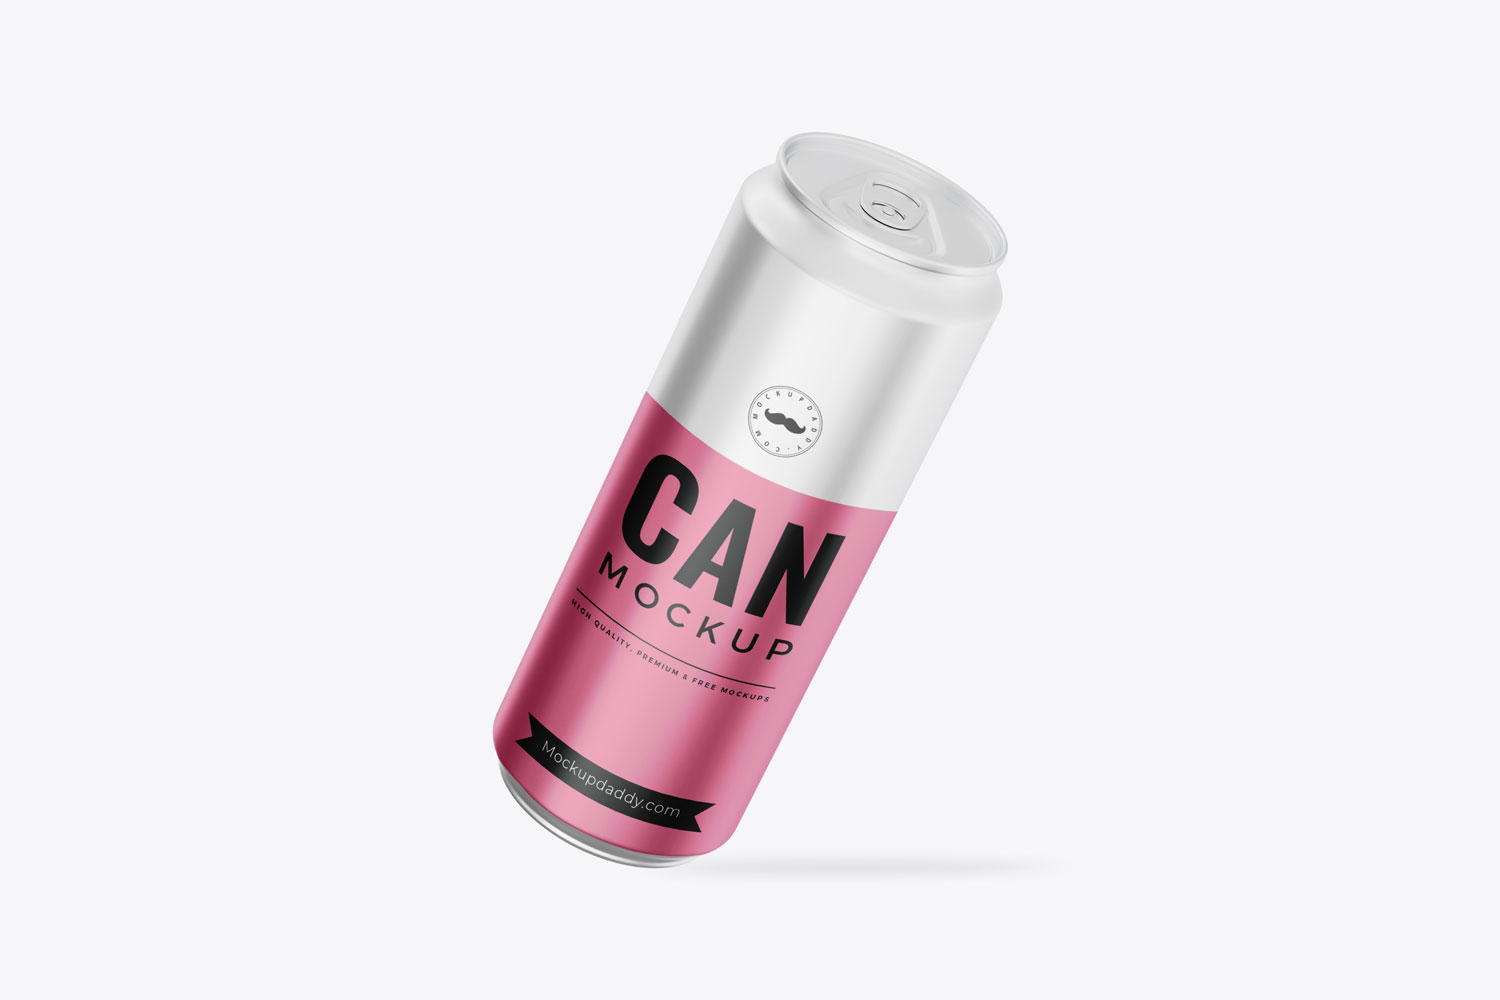 Floating Soda Can Mockup with a pink label on a white background.